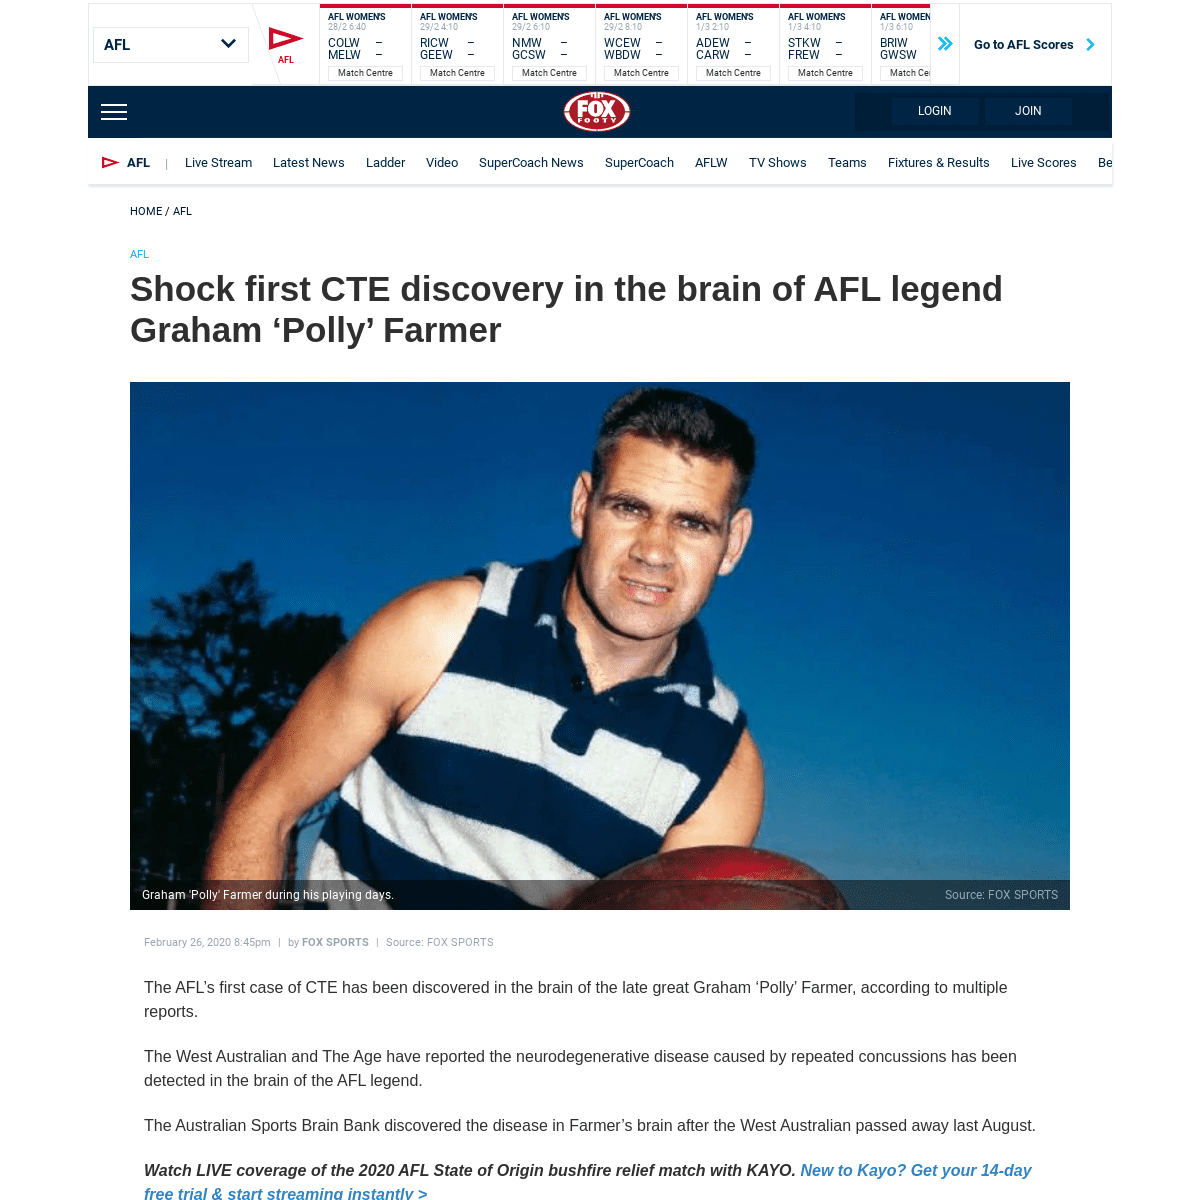 A complete backup of www.foxsports.com.au/afl/shock-cte-discovery-in-the-brain-of-afl-legend-graham-polly-farmer/news-story/b025